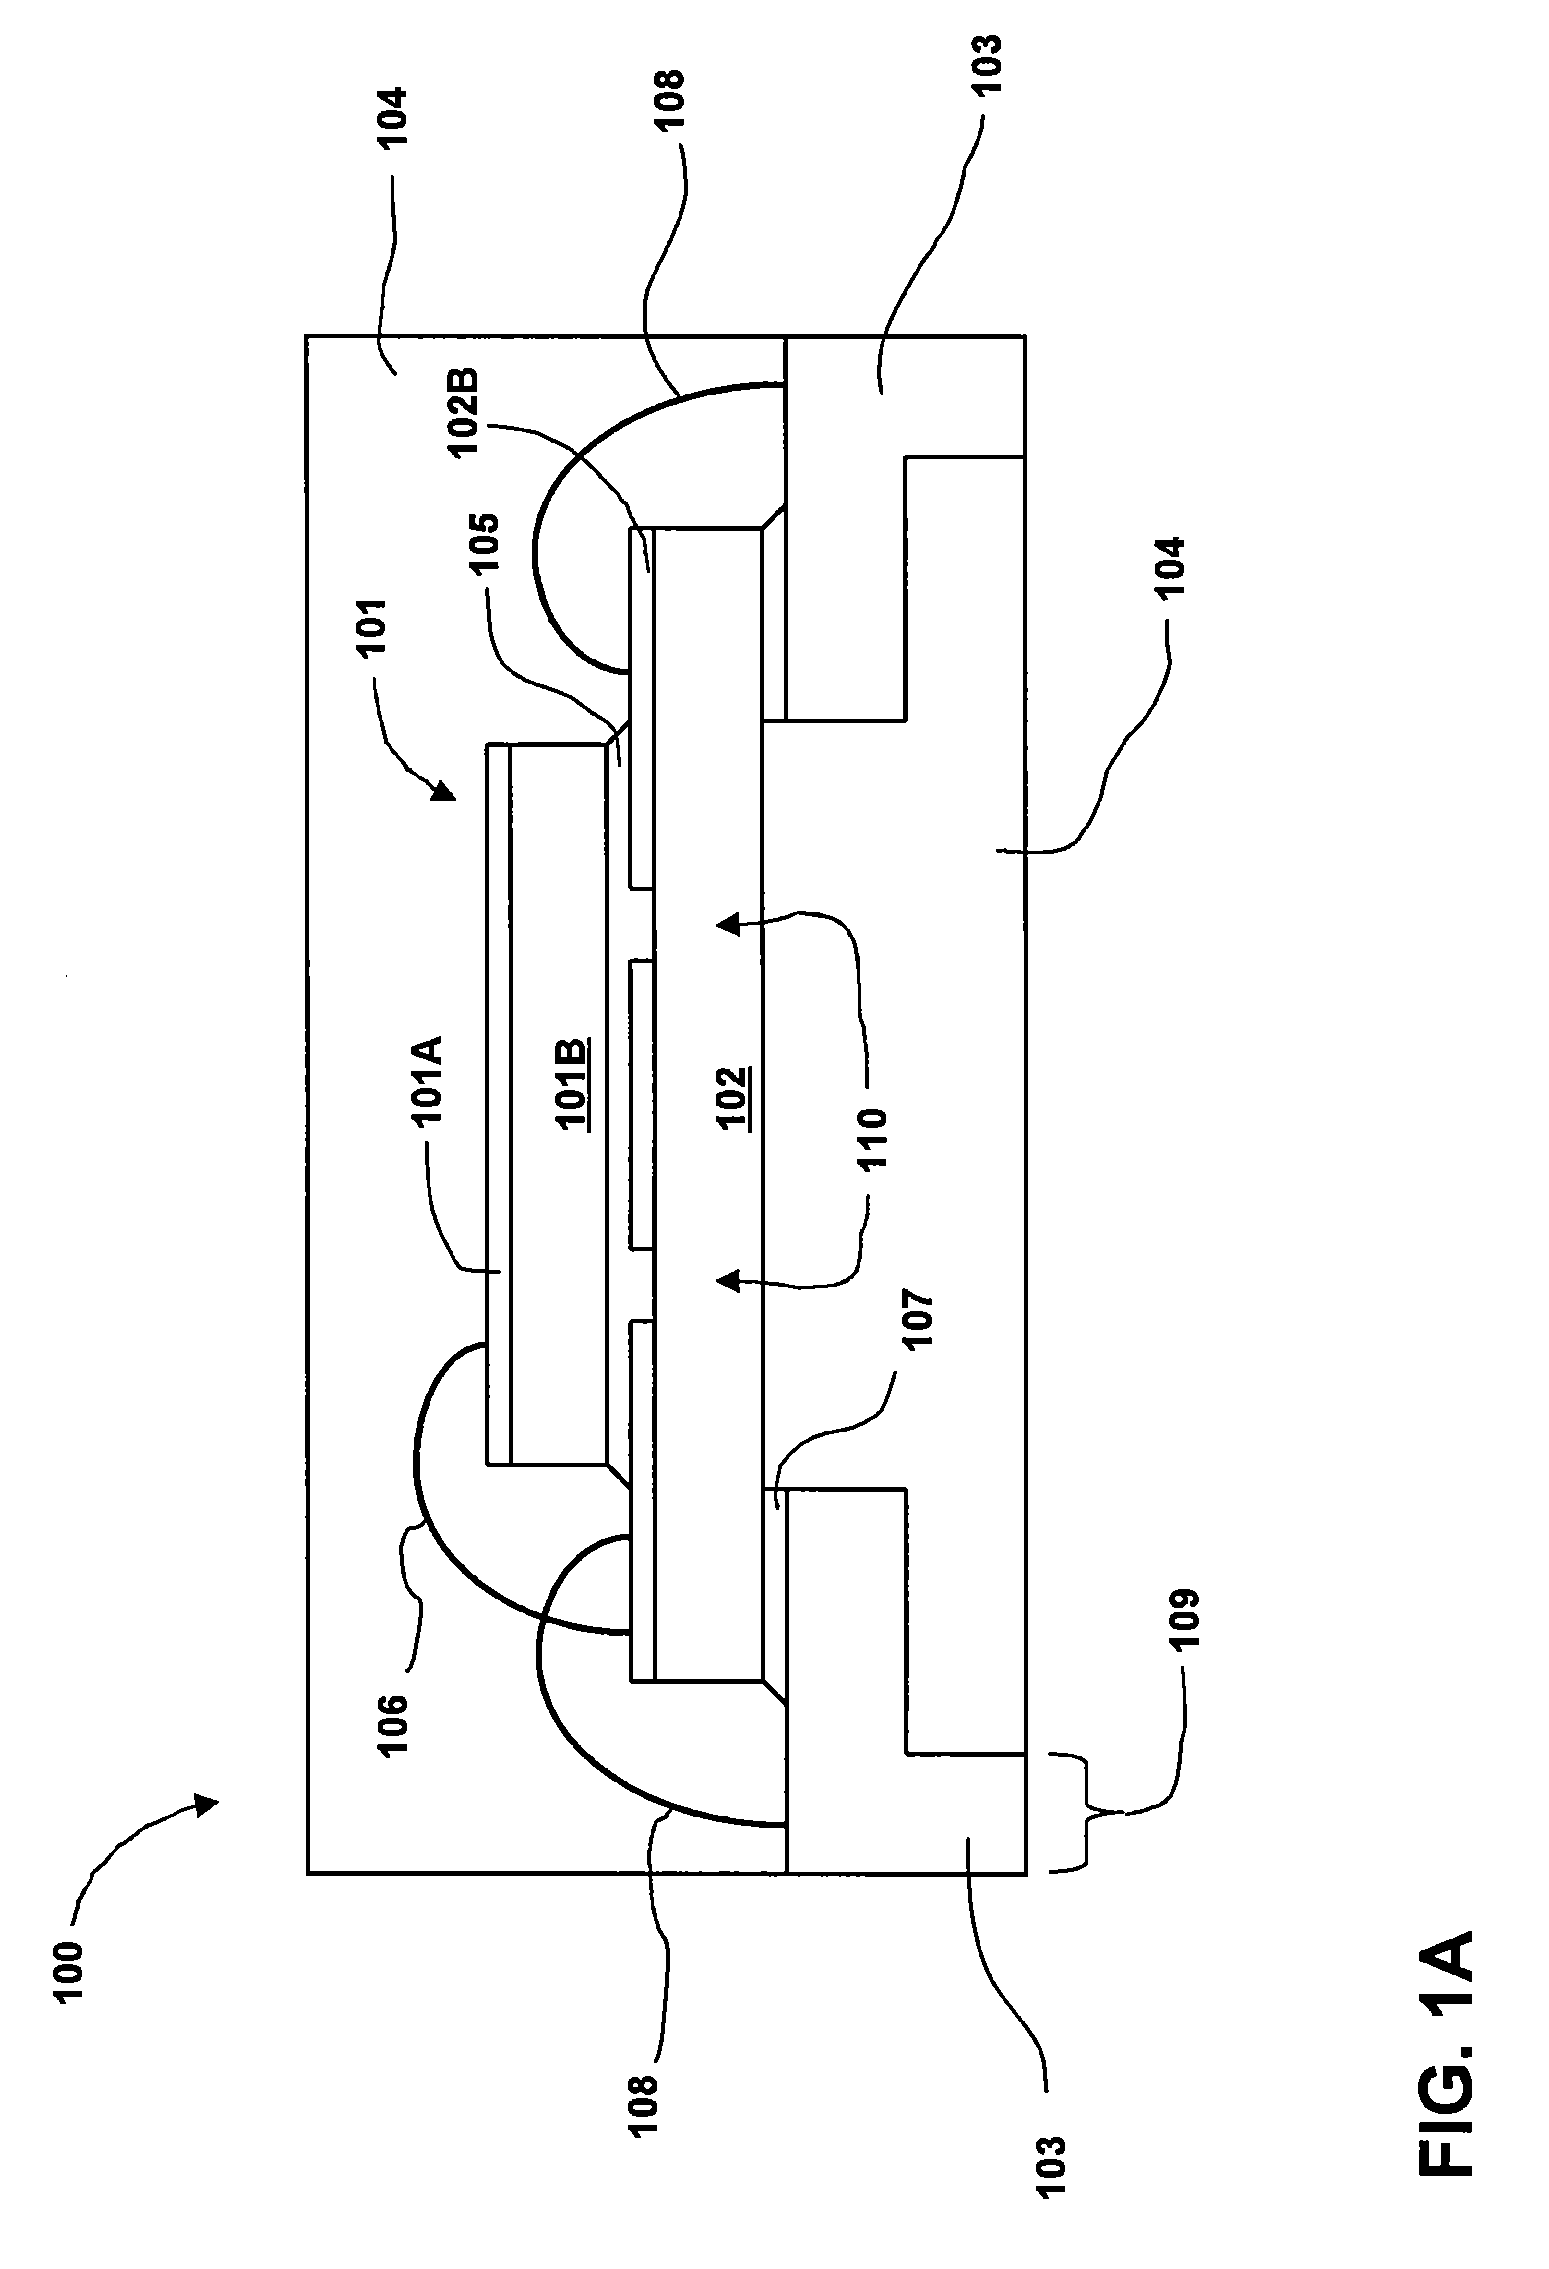 Stacked die package for MEMS resonator system